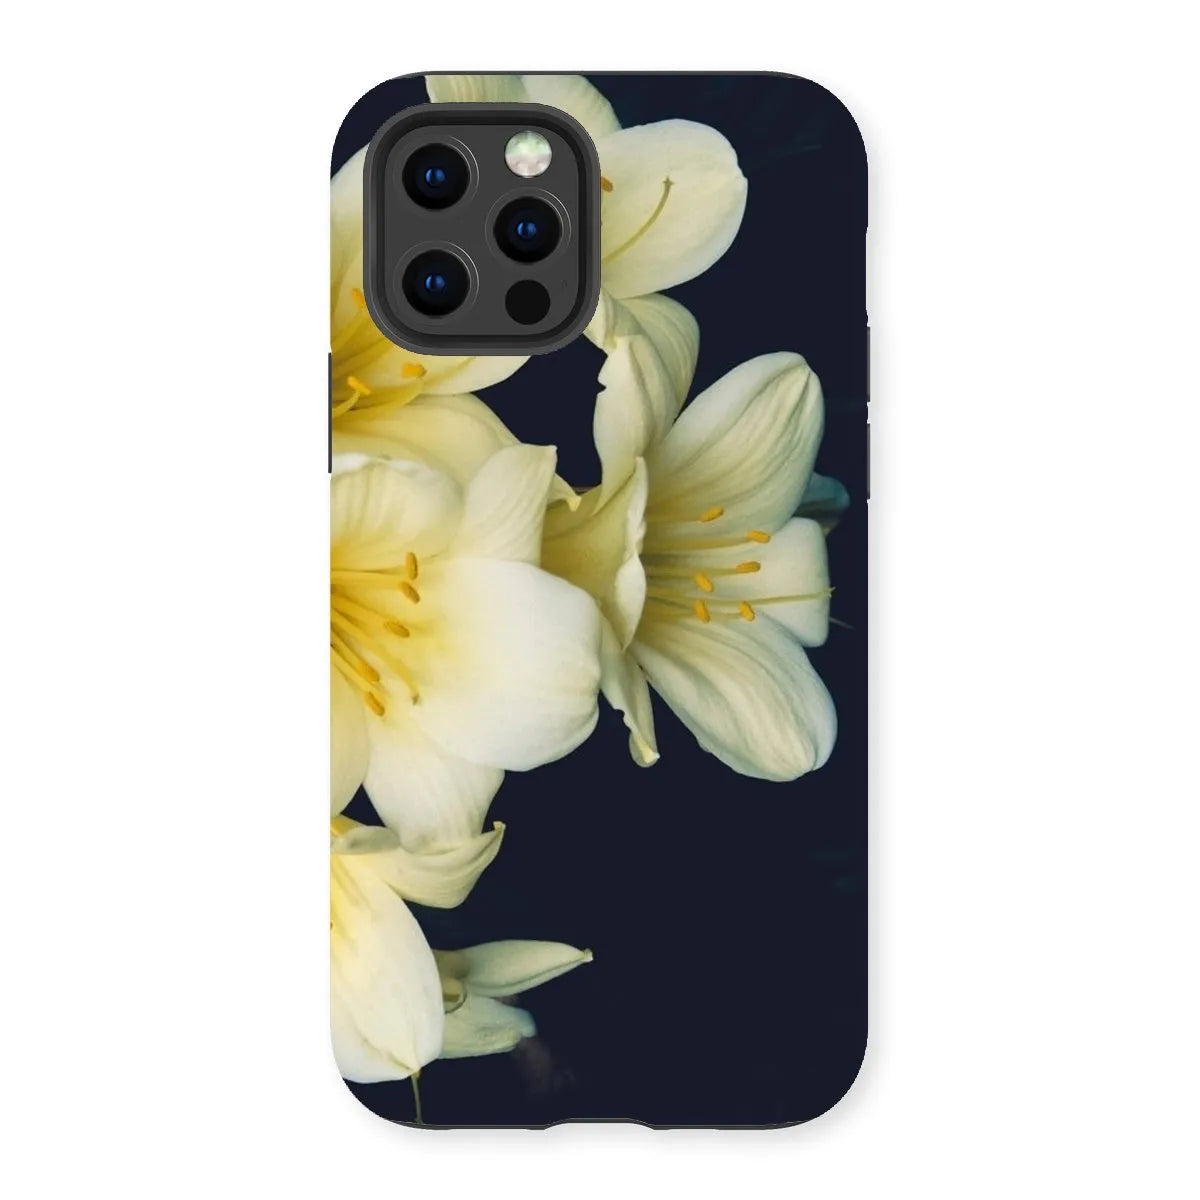 Flower Power Too Tough Phone Case - Iphone 13 Pro / Matte - Mobile Phone Cases - Aesthetic Art